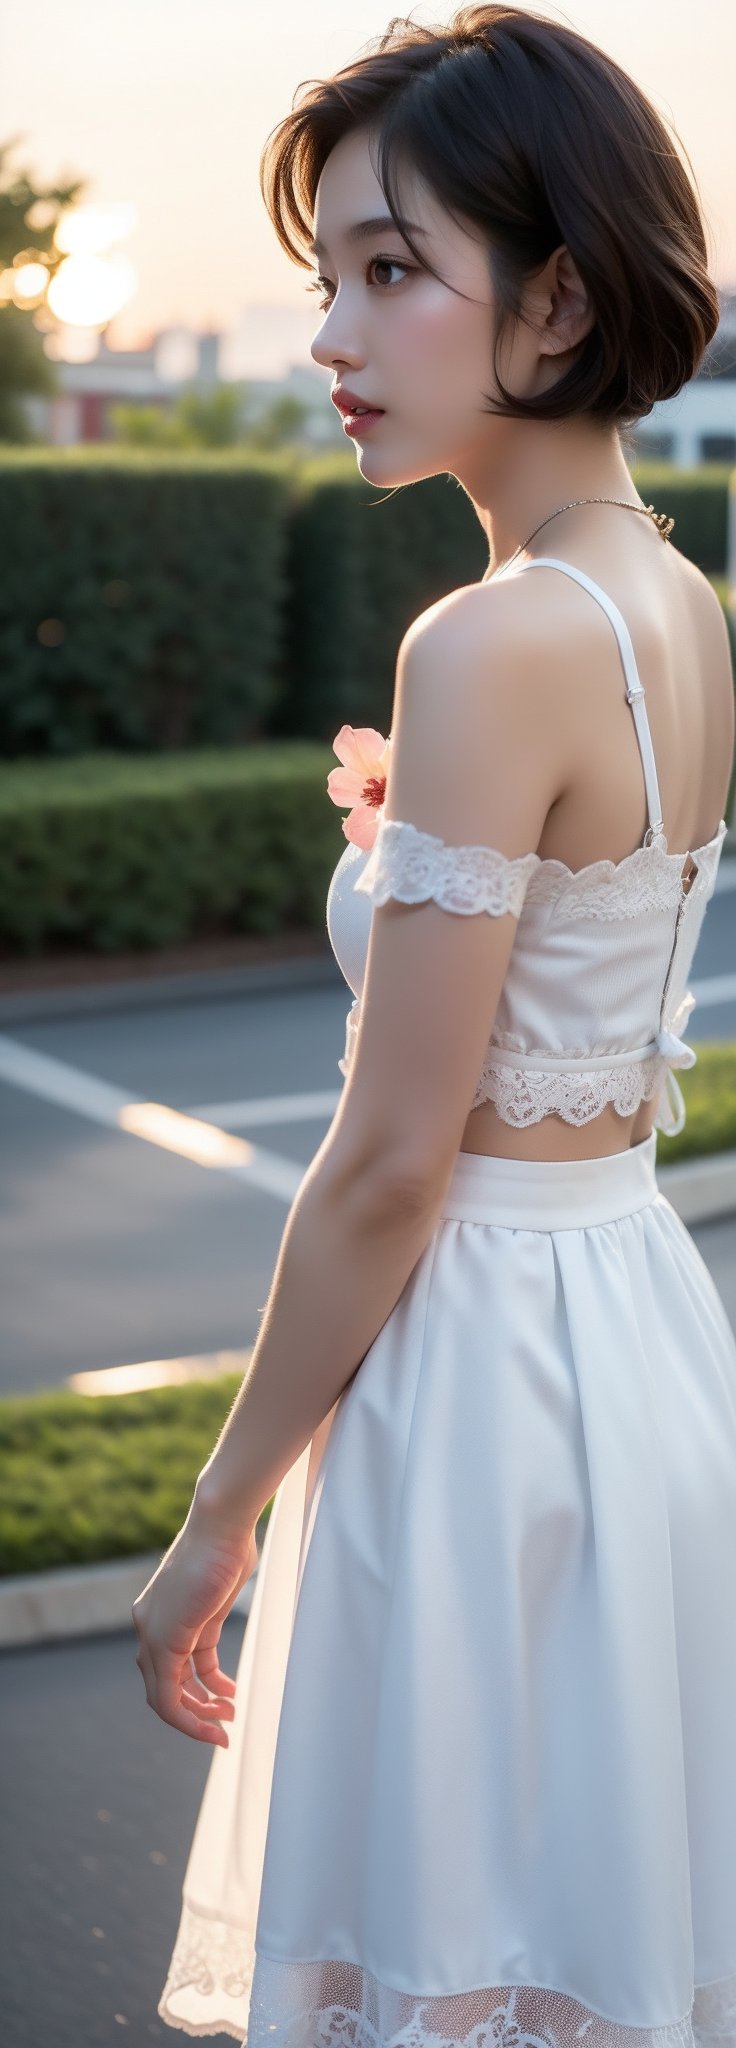 front-view,  1girl, ,Masterpiece, exquisite details, perfect focus, unified 8K wallpaper, high resolution, fine textures in every detail, solo, short hair, black hair, White long skirt,whole body, flower,  sunset,movie mood,Beautiful,  perfect light,  ,Korean,Beauty,idol